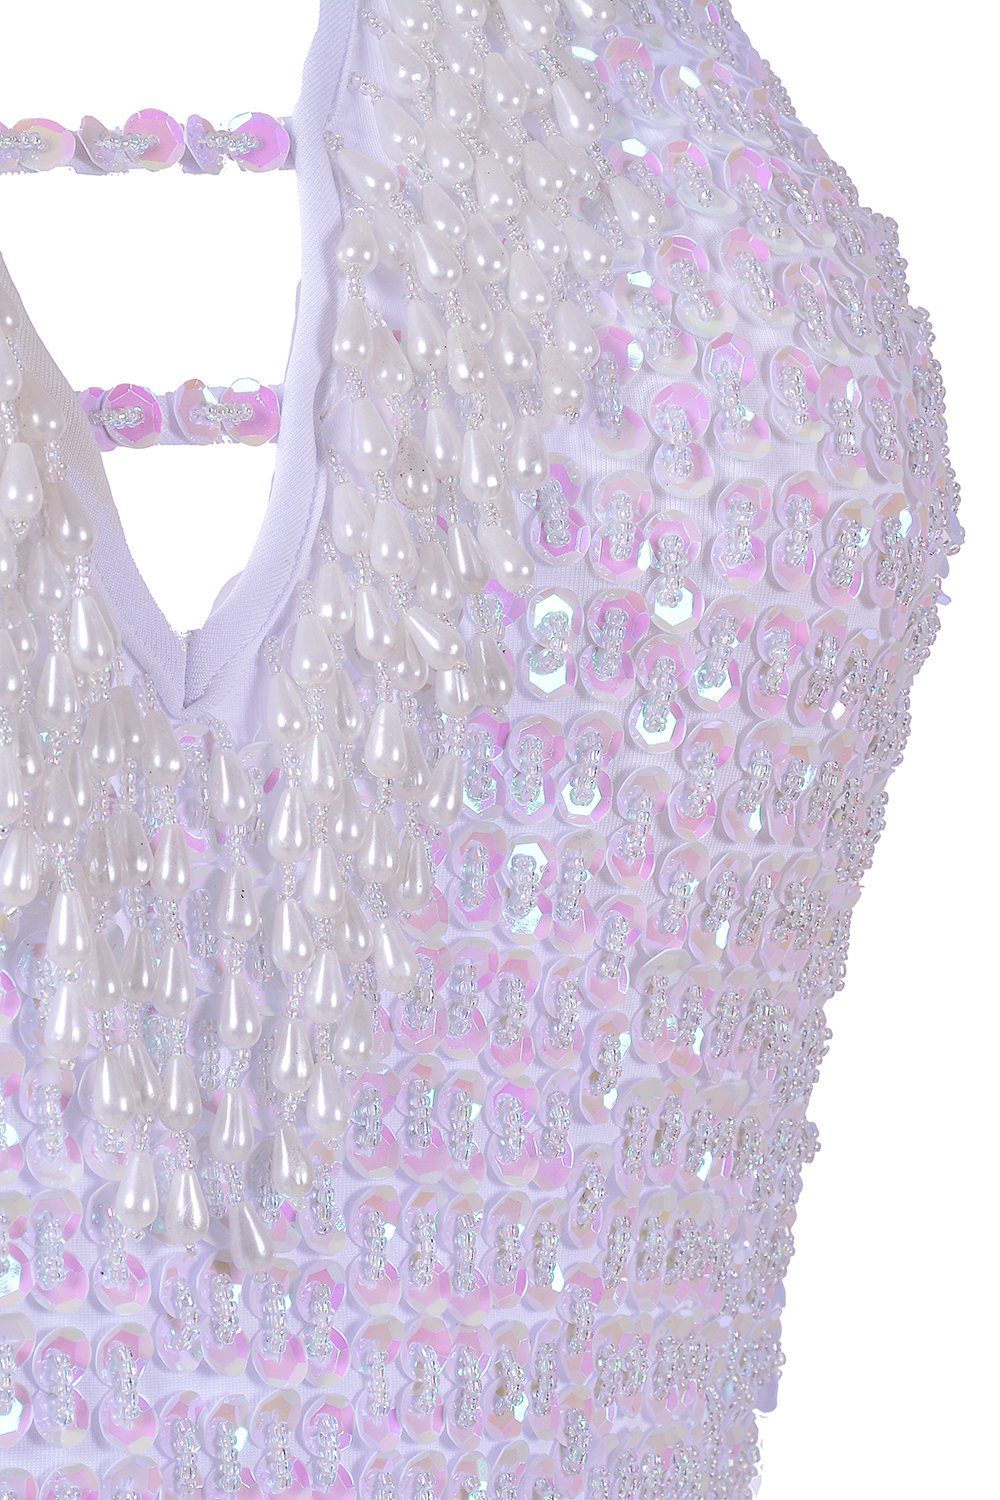 Hand Stitched Sequin Bodysuit- Techno Doll